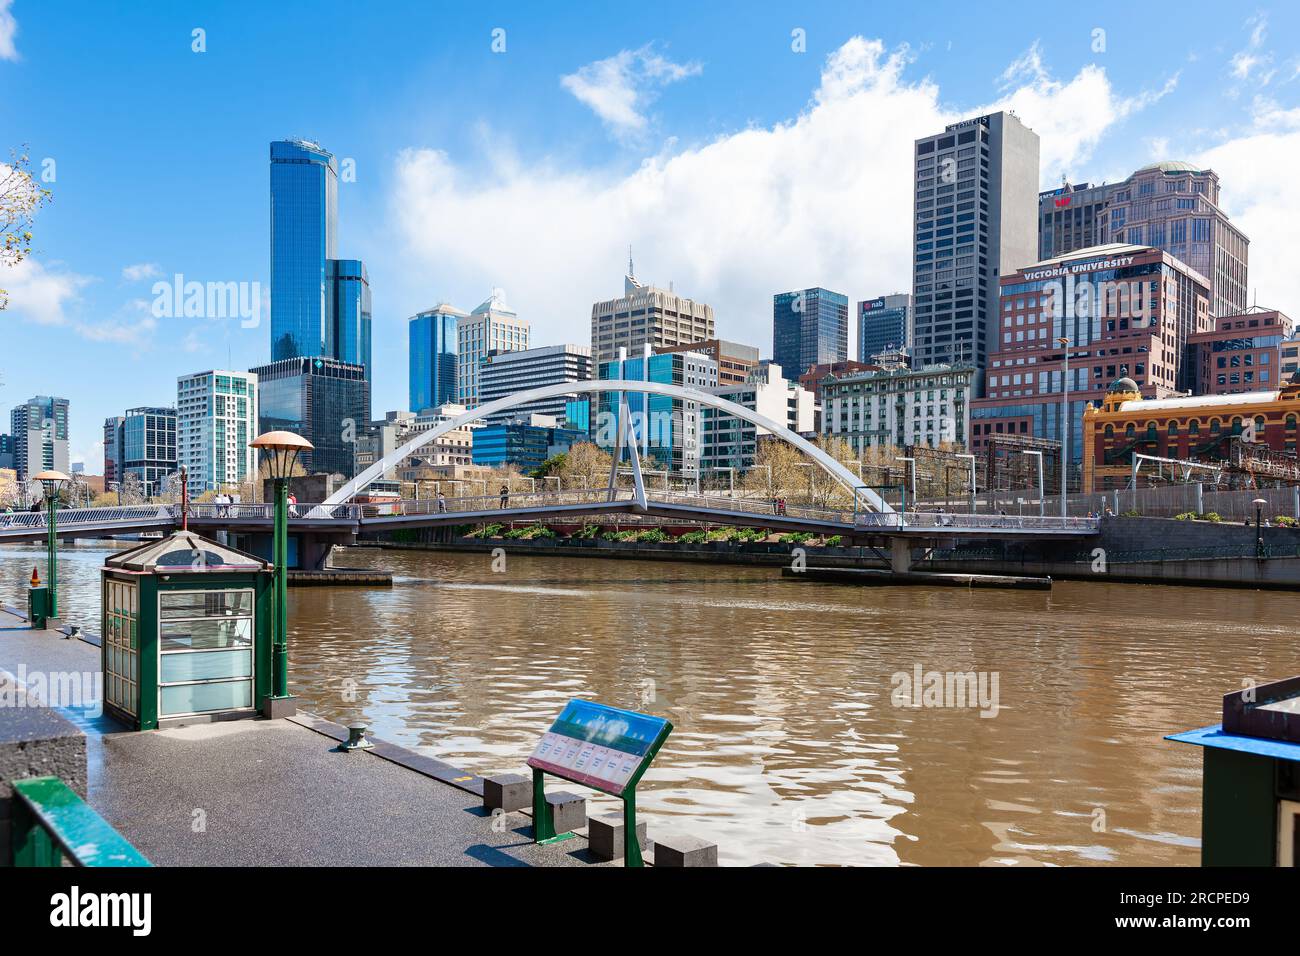 Melbourne, Australia - September 28, 2010 : Yarra River and Melbourne northbank. Southbank Pedestrian Bridge connecting north and south bank. Stock Photo